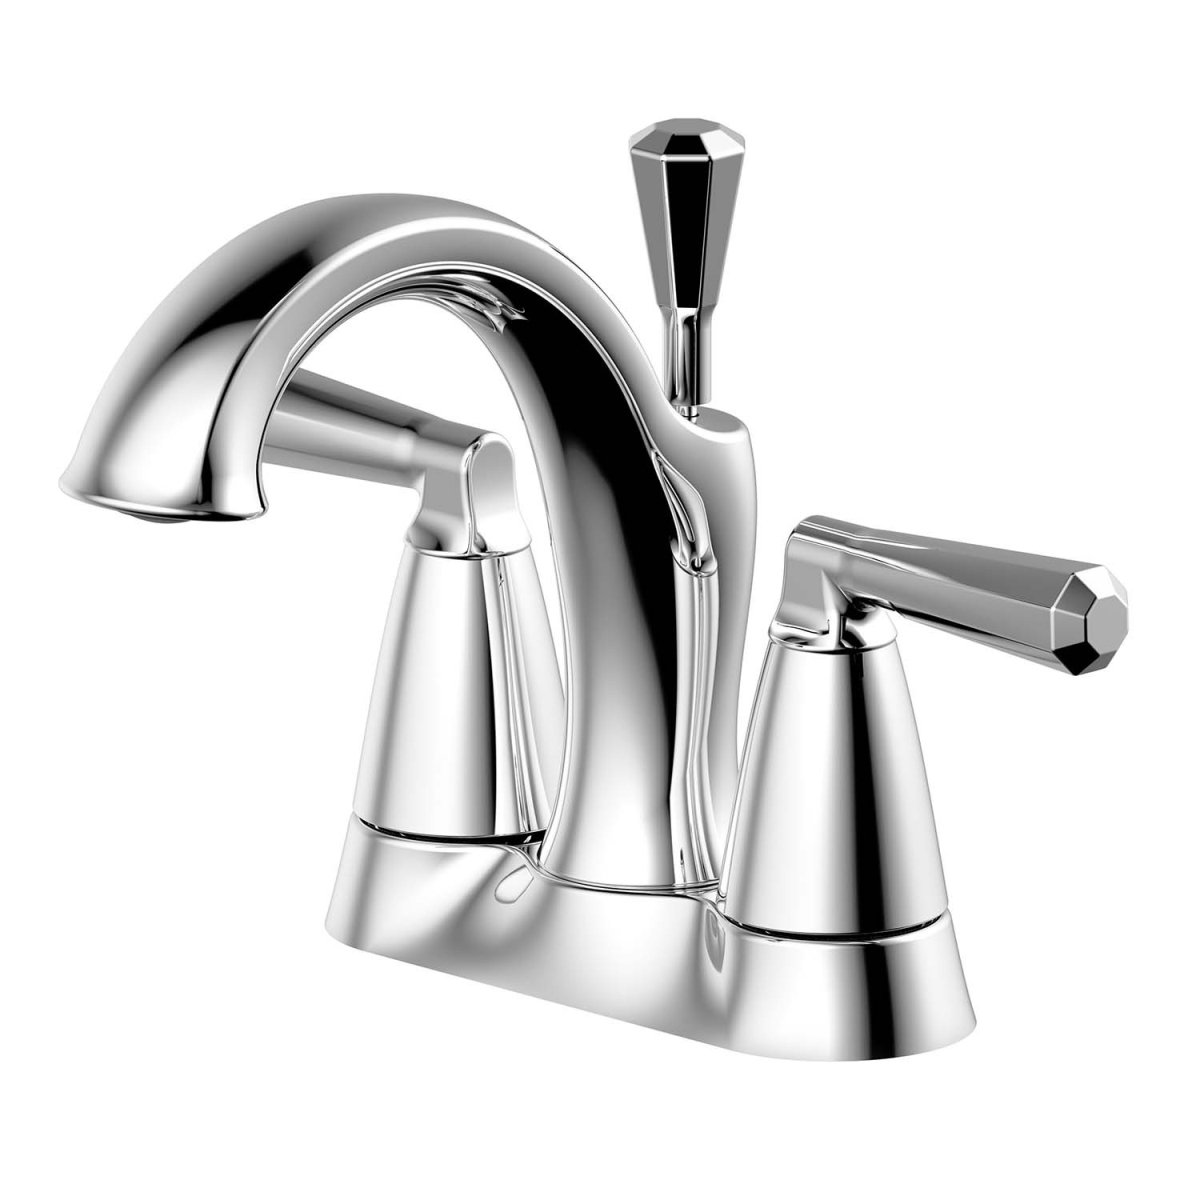 Uf45910 4 In. Two-handle Lavatory Faucet - Chrome